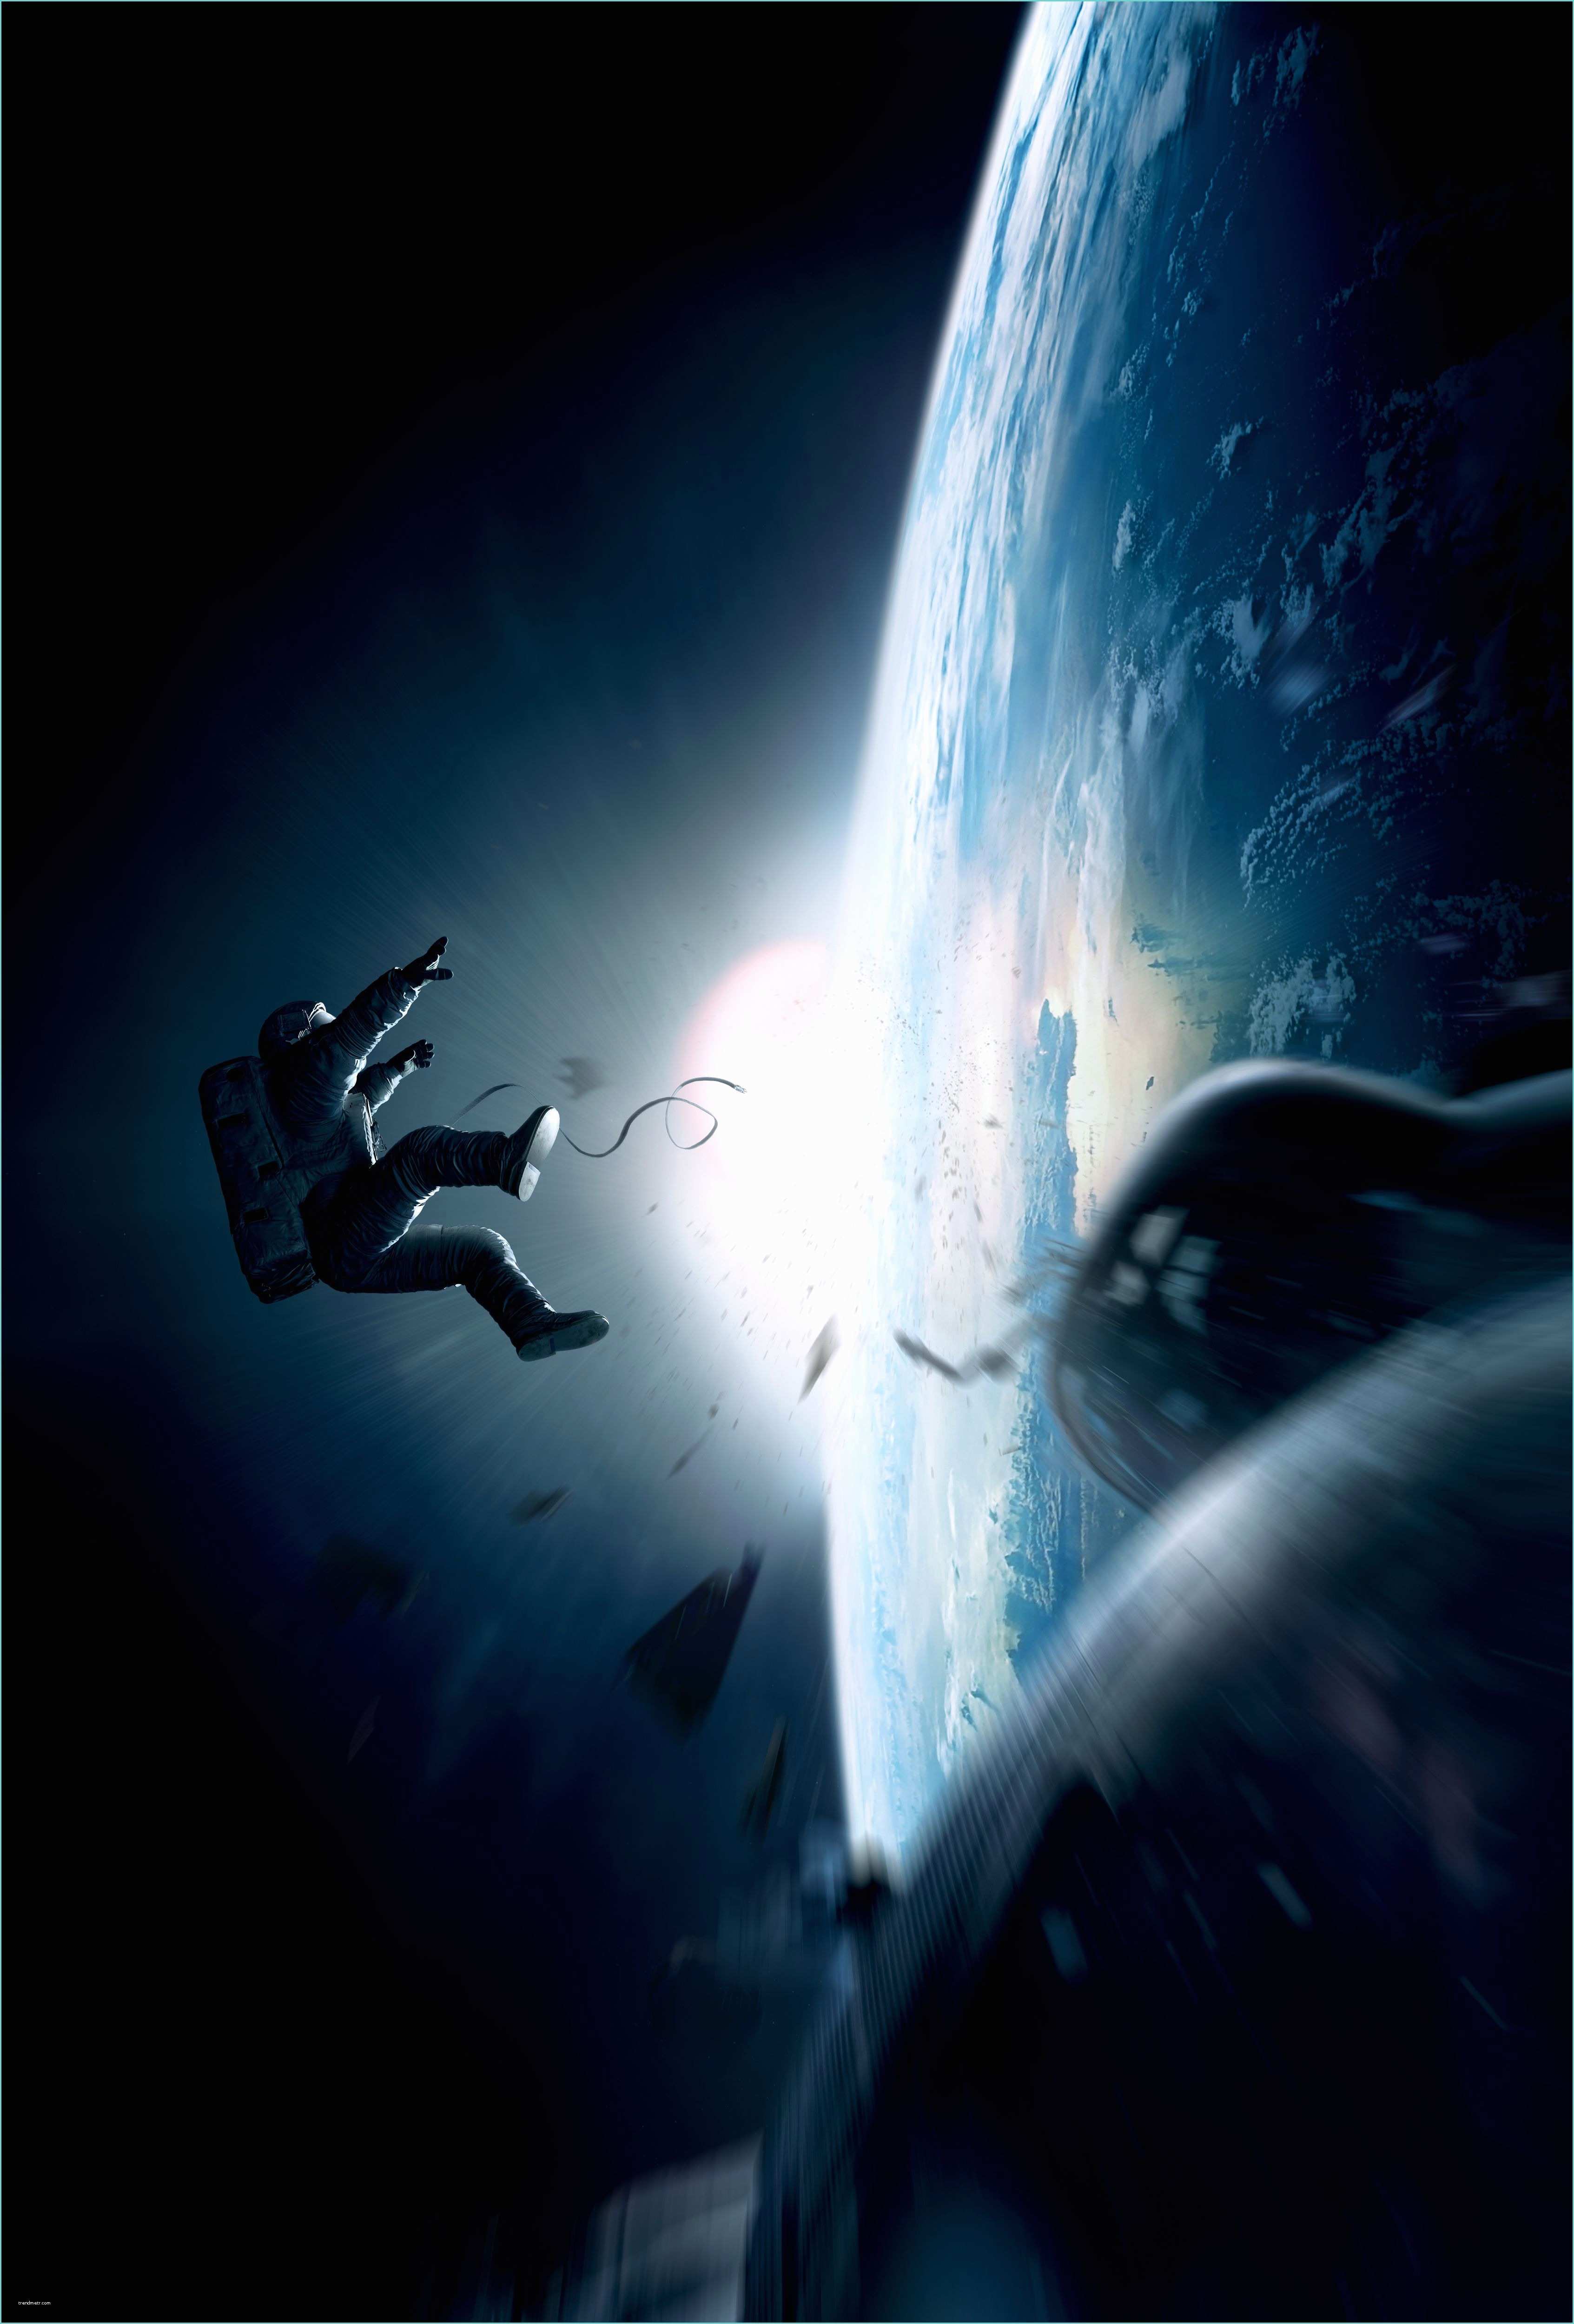 Allposters Return Policy Gravity Textless Movie Poster Awesome Movie Posters